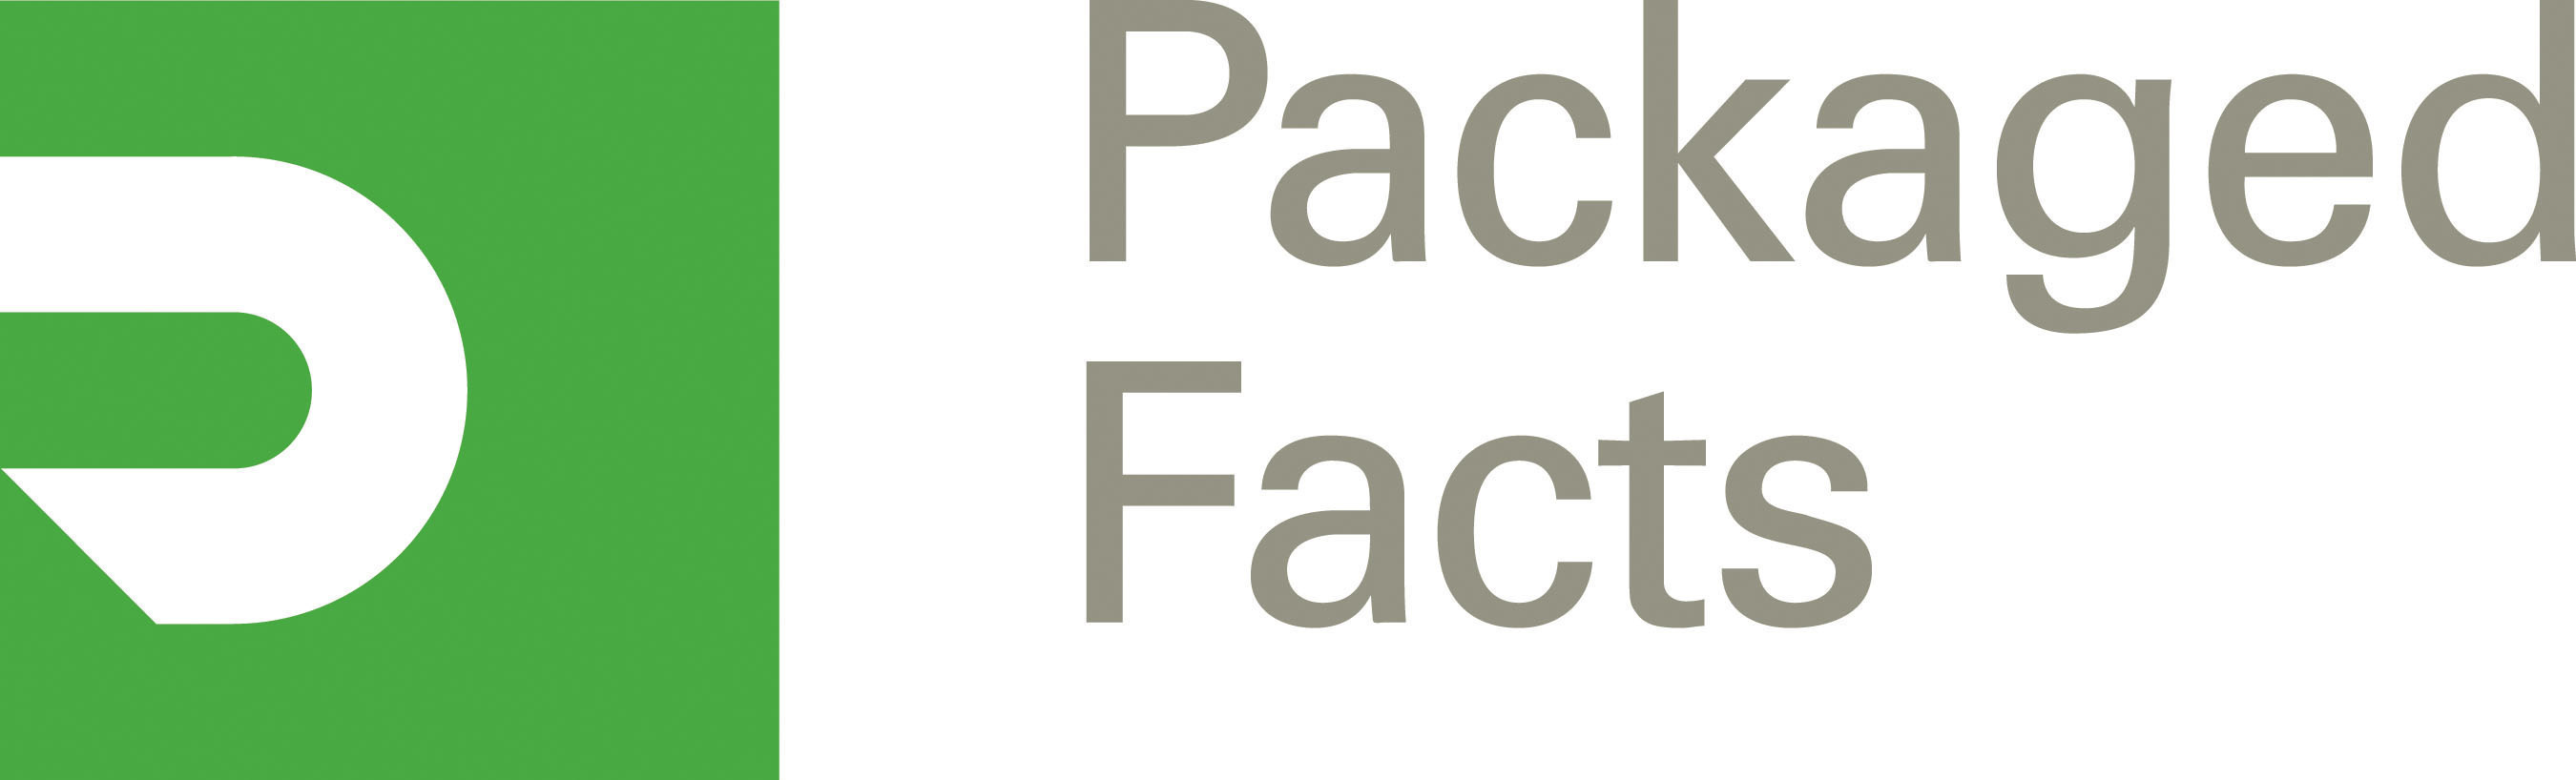 Packaged Facts Logo (PRNewsFoto/Packaged Facts) (PRNewsFoto/Packaged Facts)